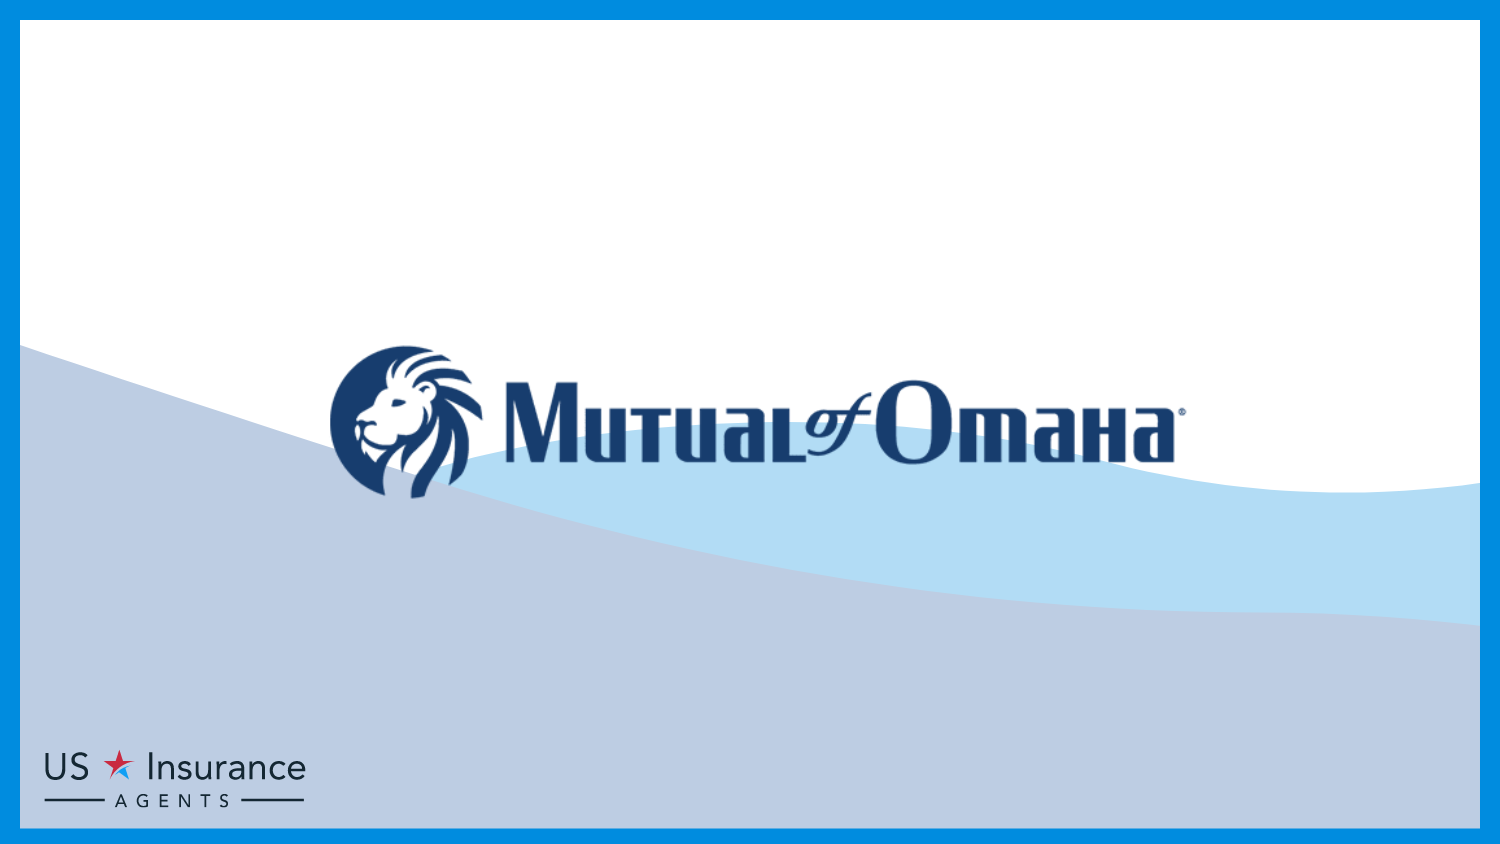 Mutual of Omaha: Best Life Insurance for Kidney Transplant Patients